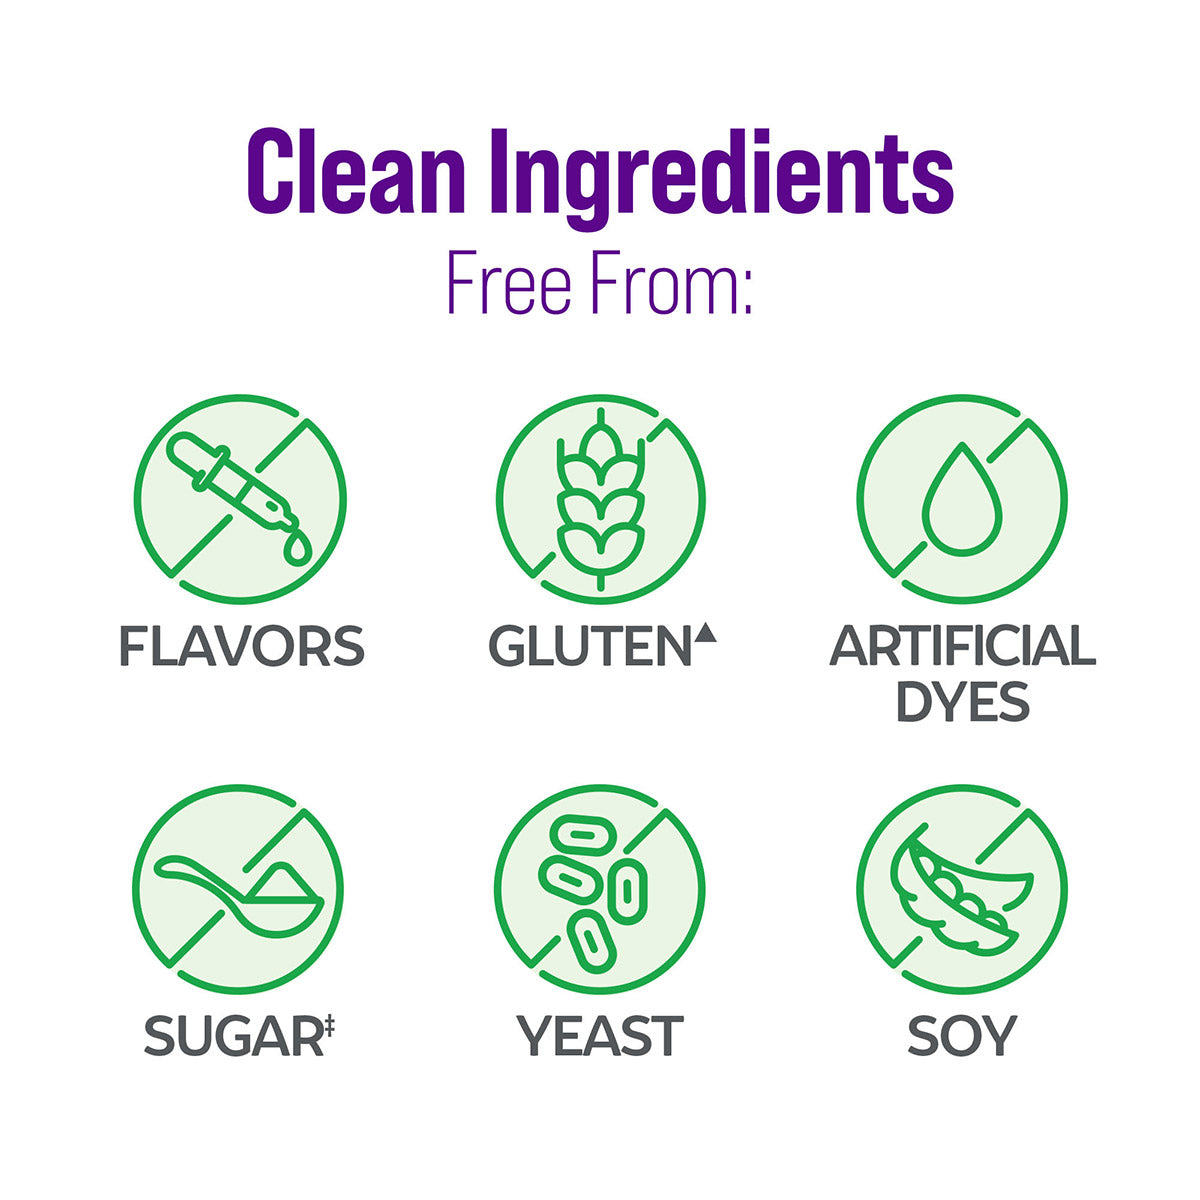 clean ingredients free from flavors, gluten, artificial dyes, sugar, yeast, and soy